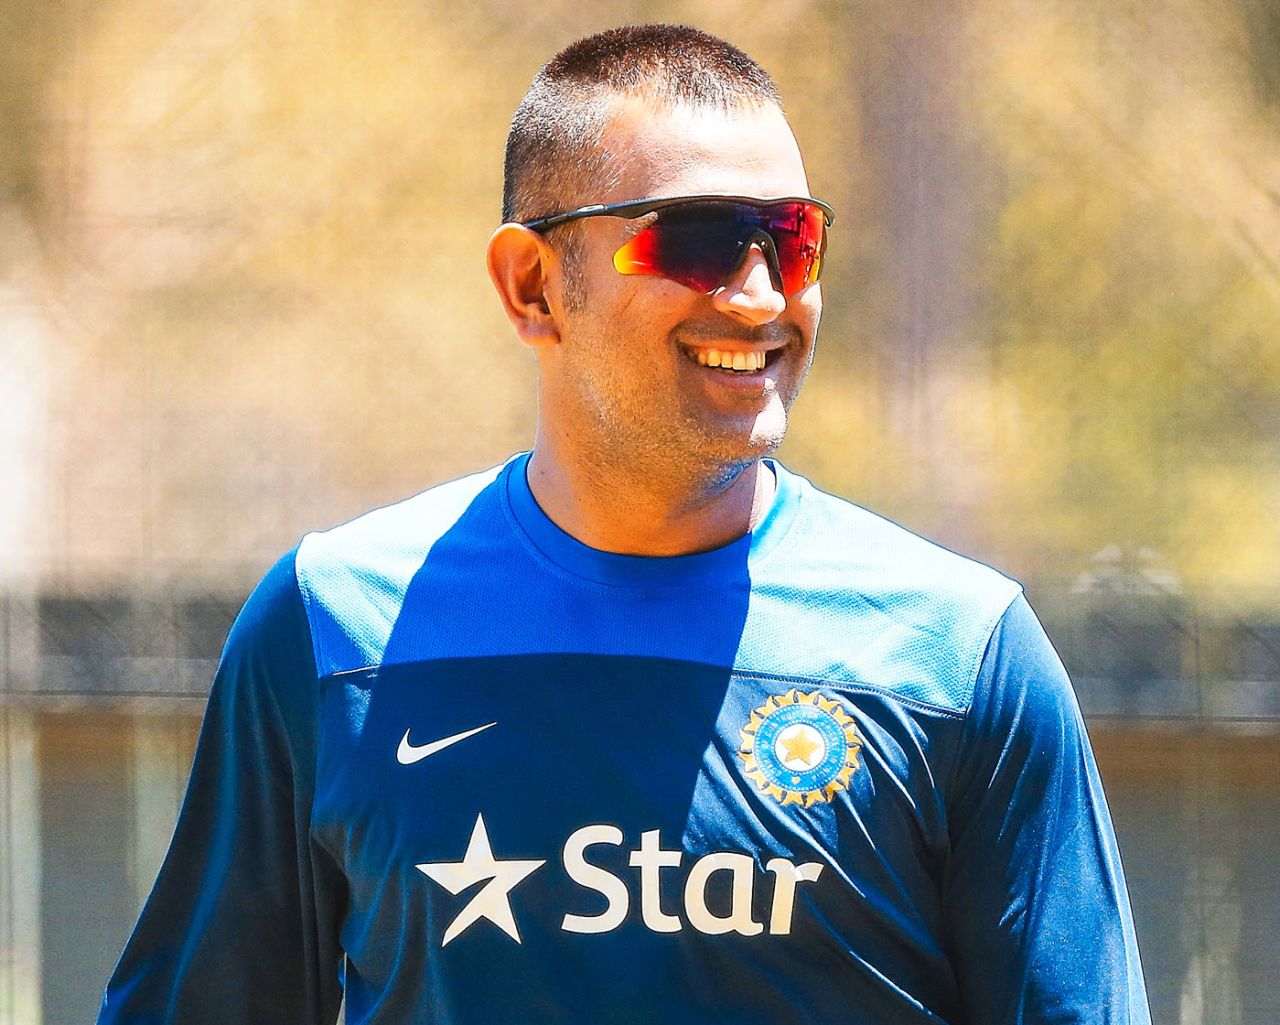 MS Dhoni at training, Adelaide, December 8, 2014